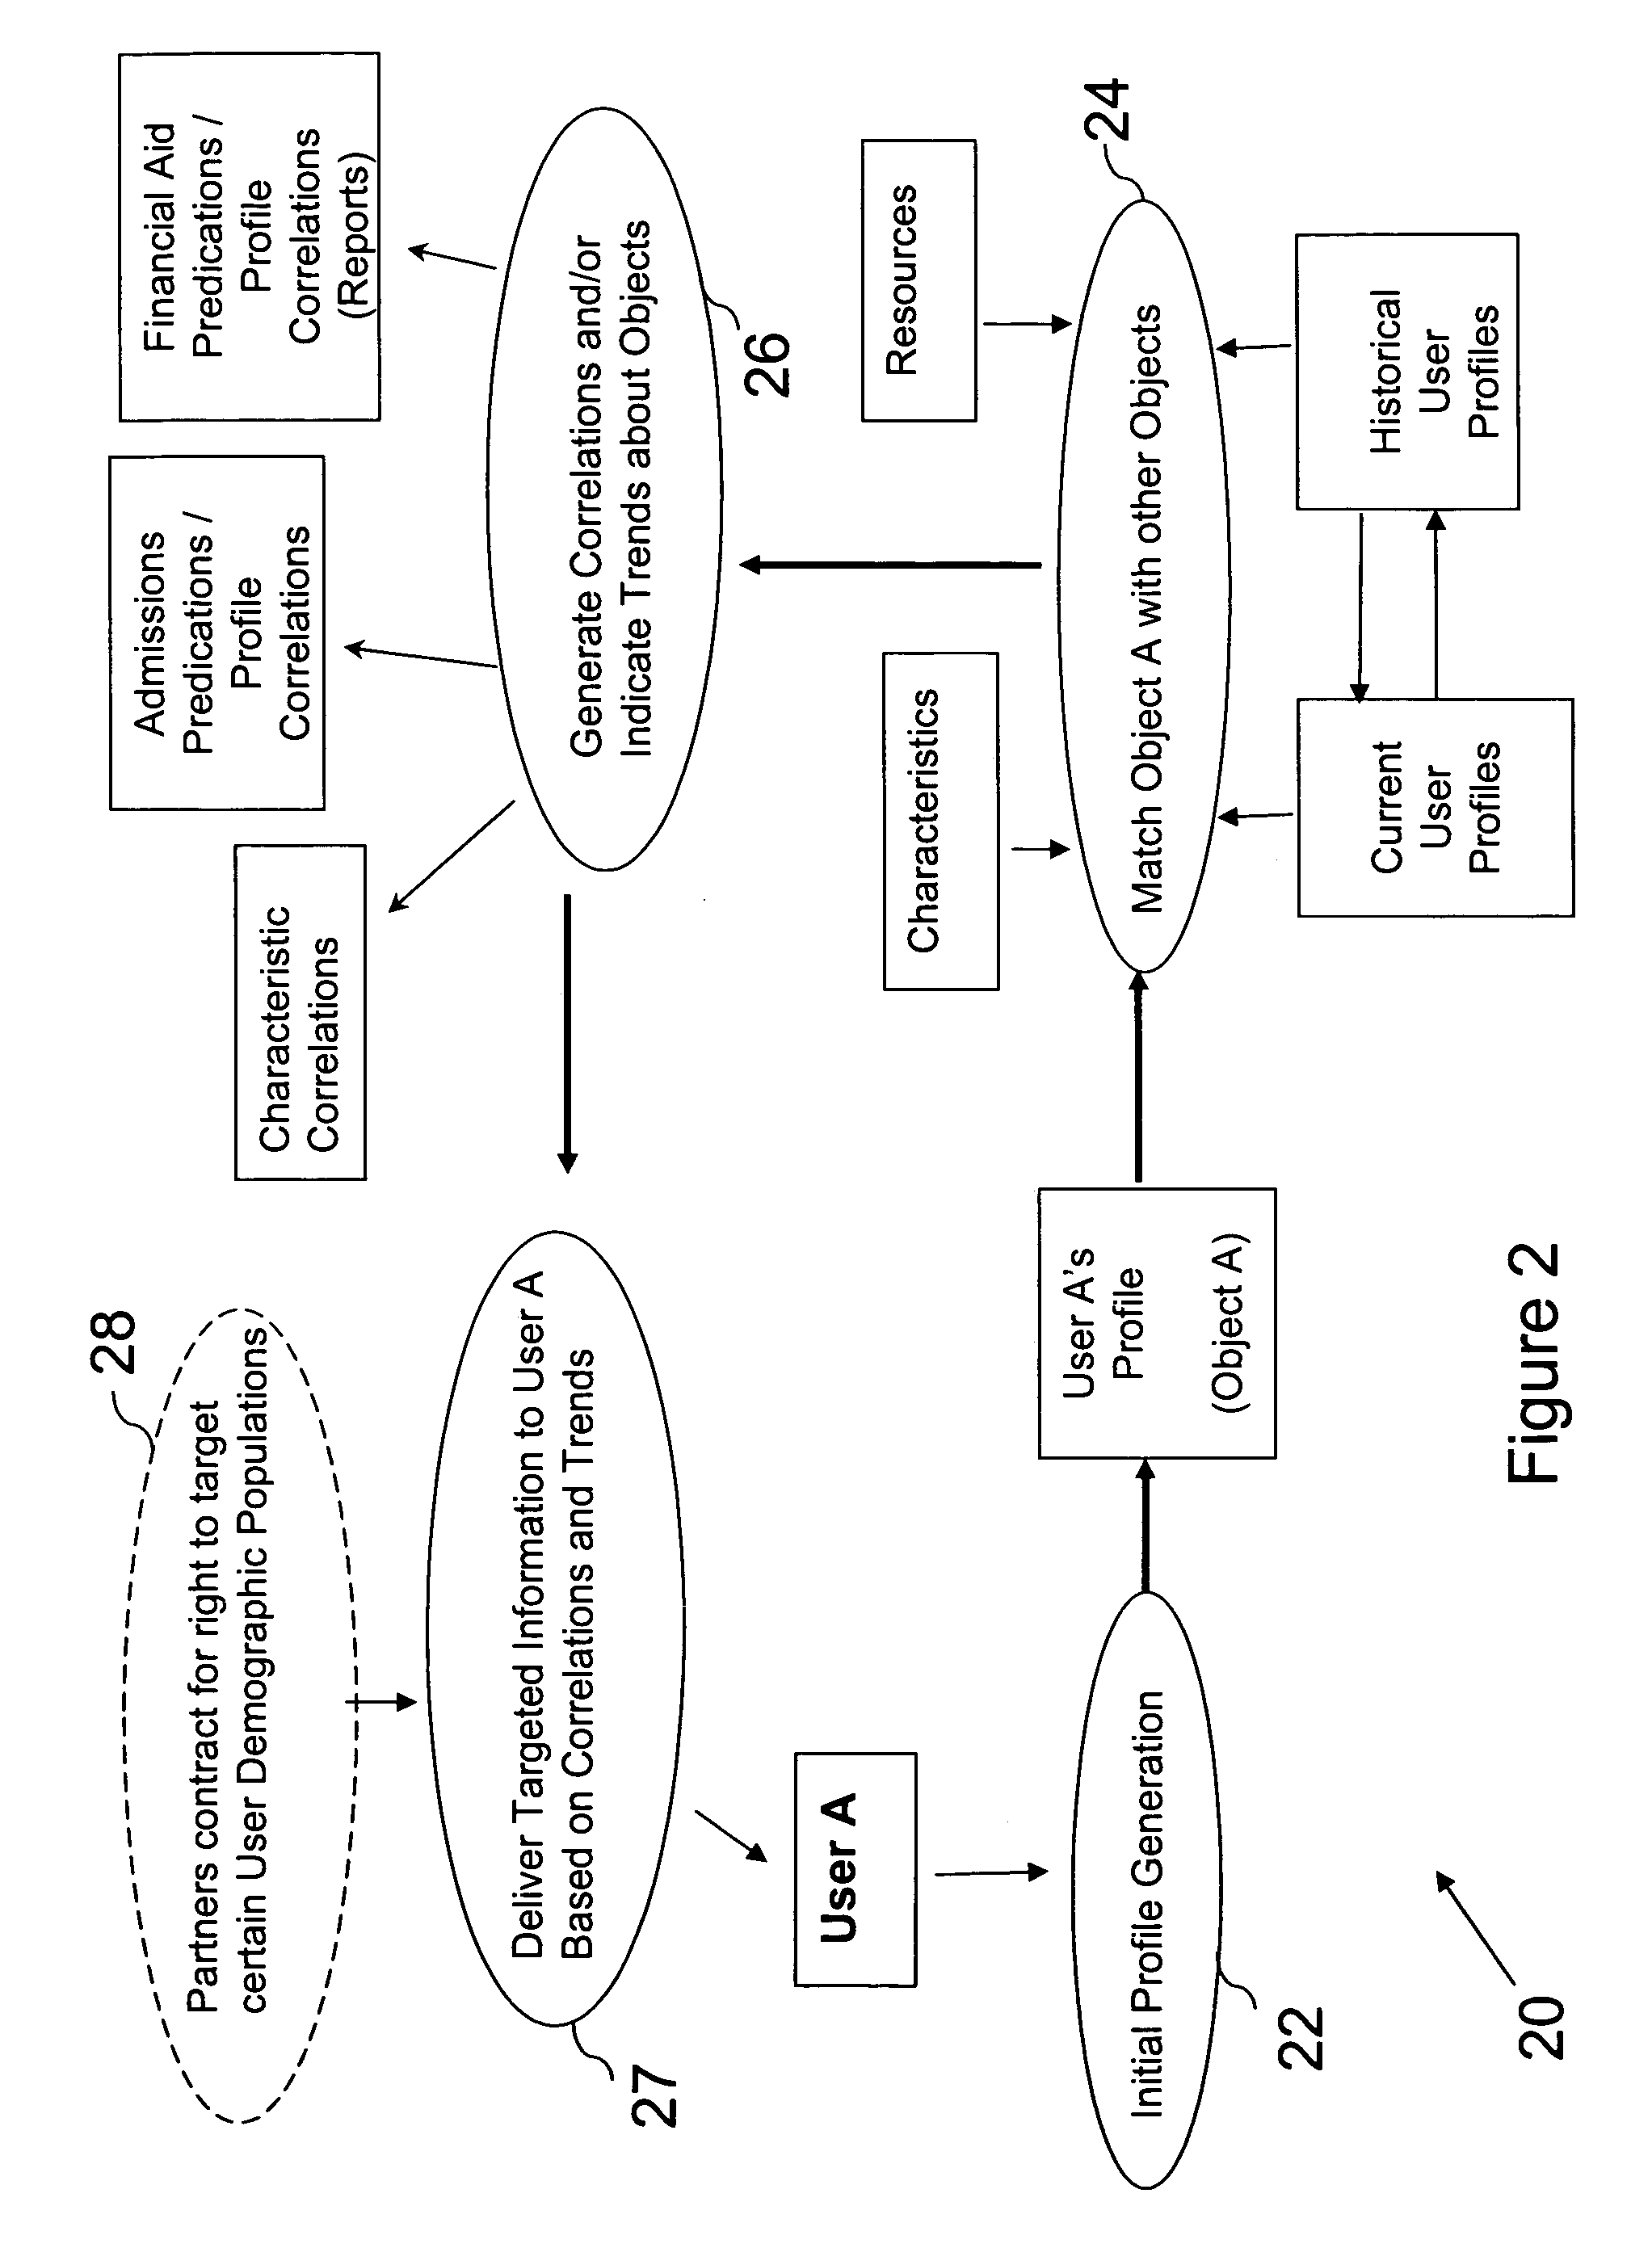 Apparatus and methods for an application process and data analysis